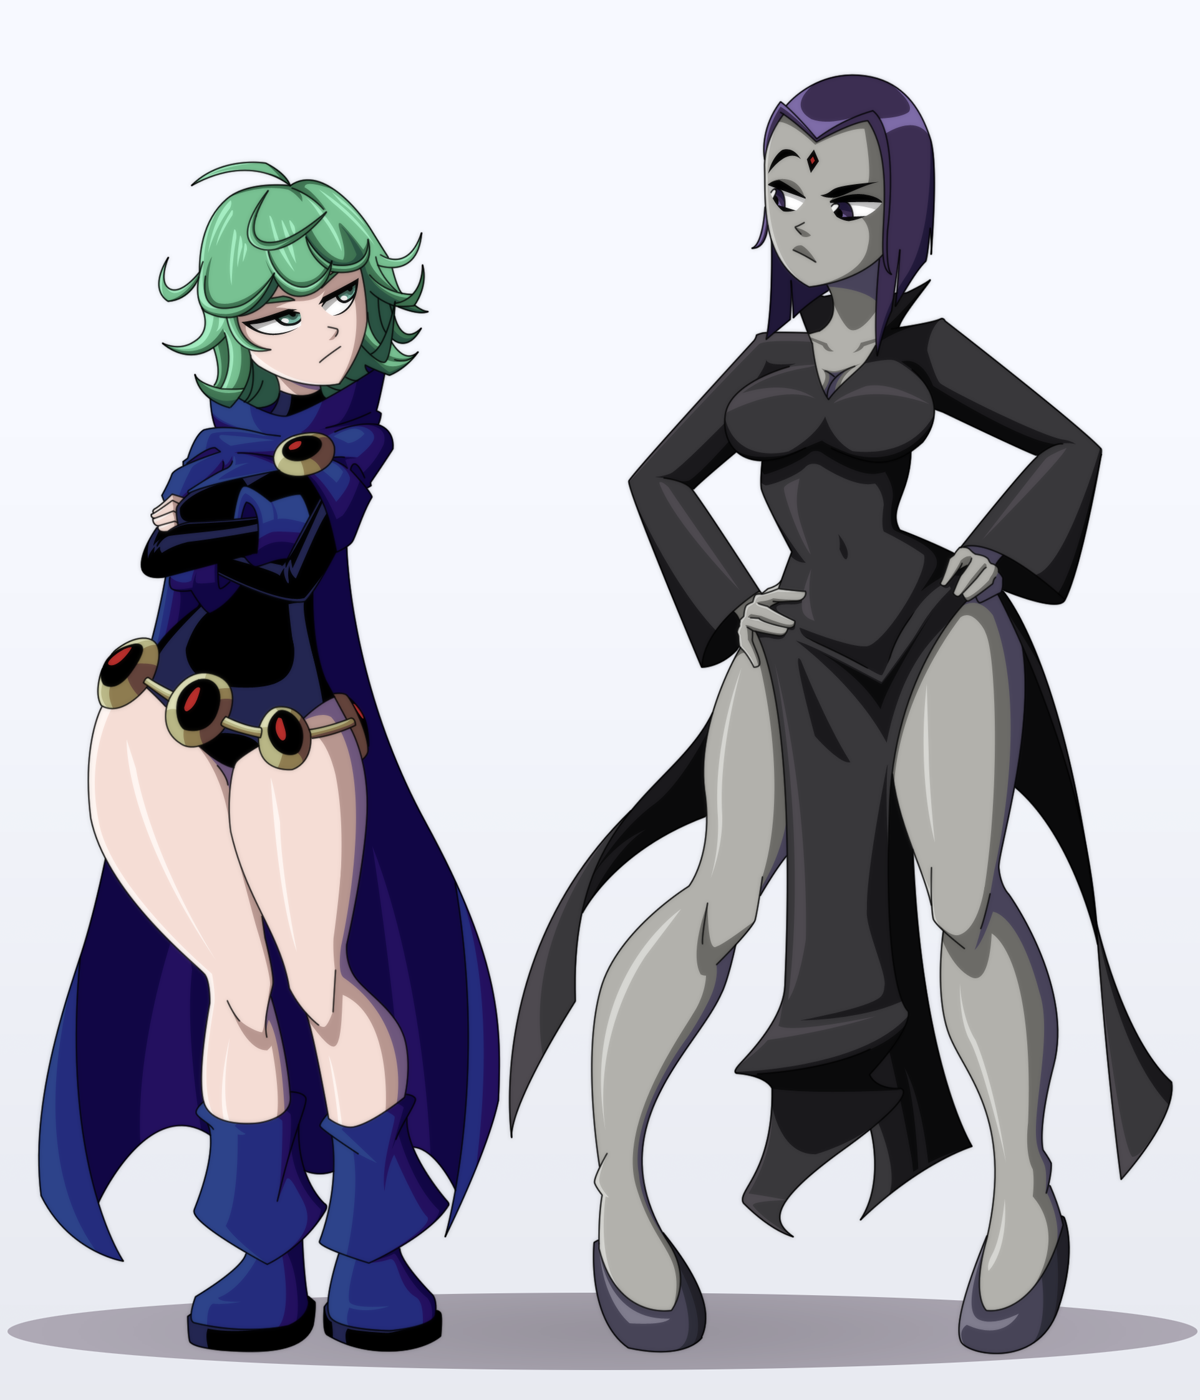 Raven And Tatsumaki Swap Outfits By Justanotherravenfan On Deviantart